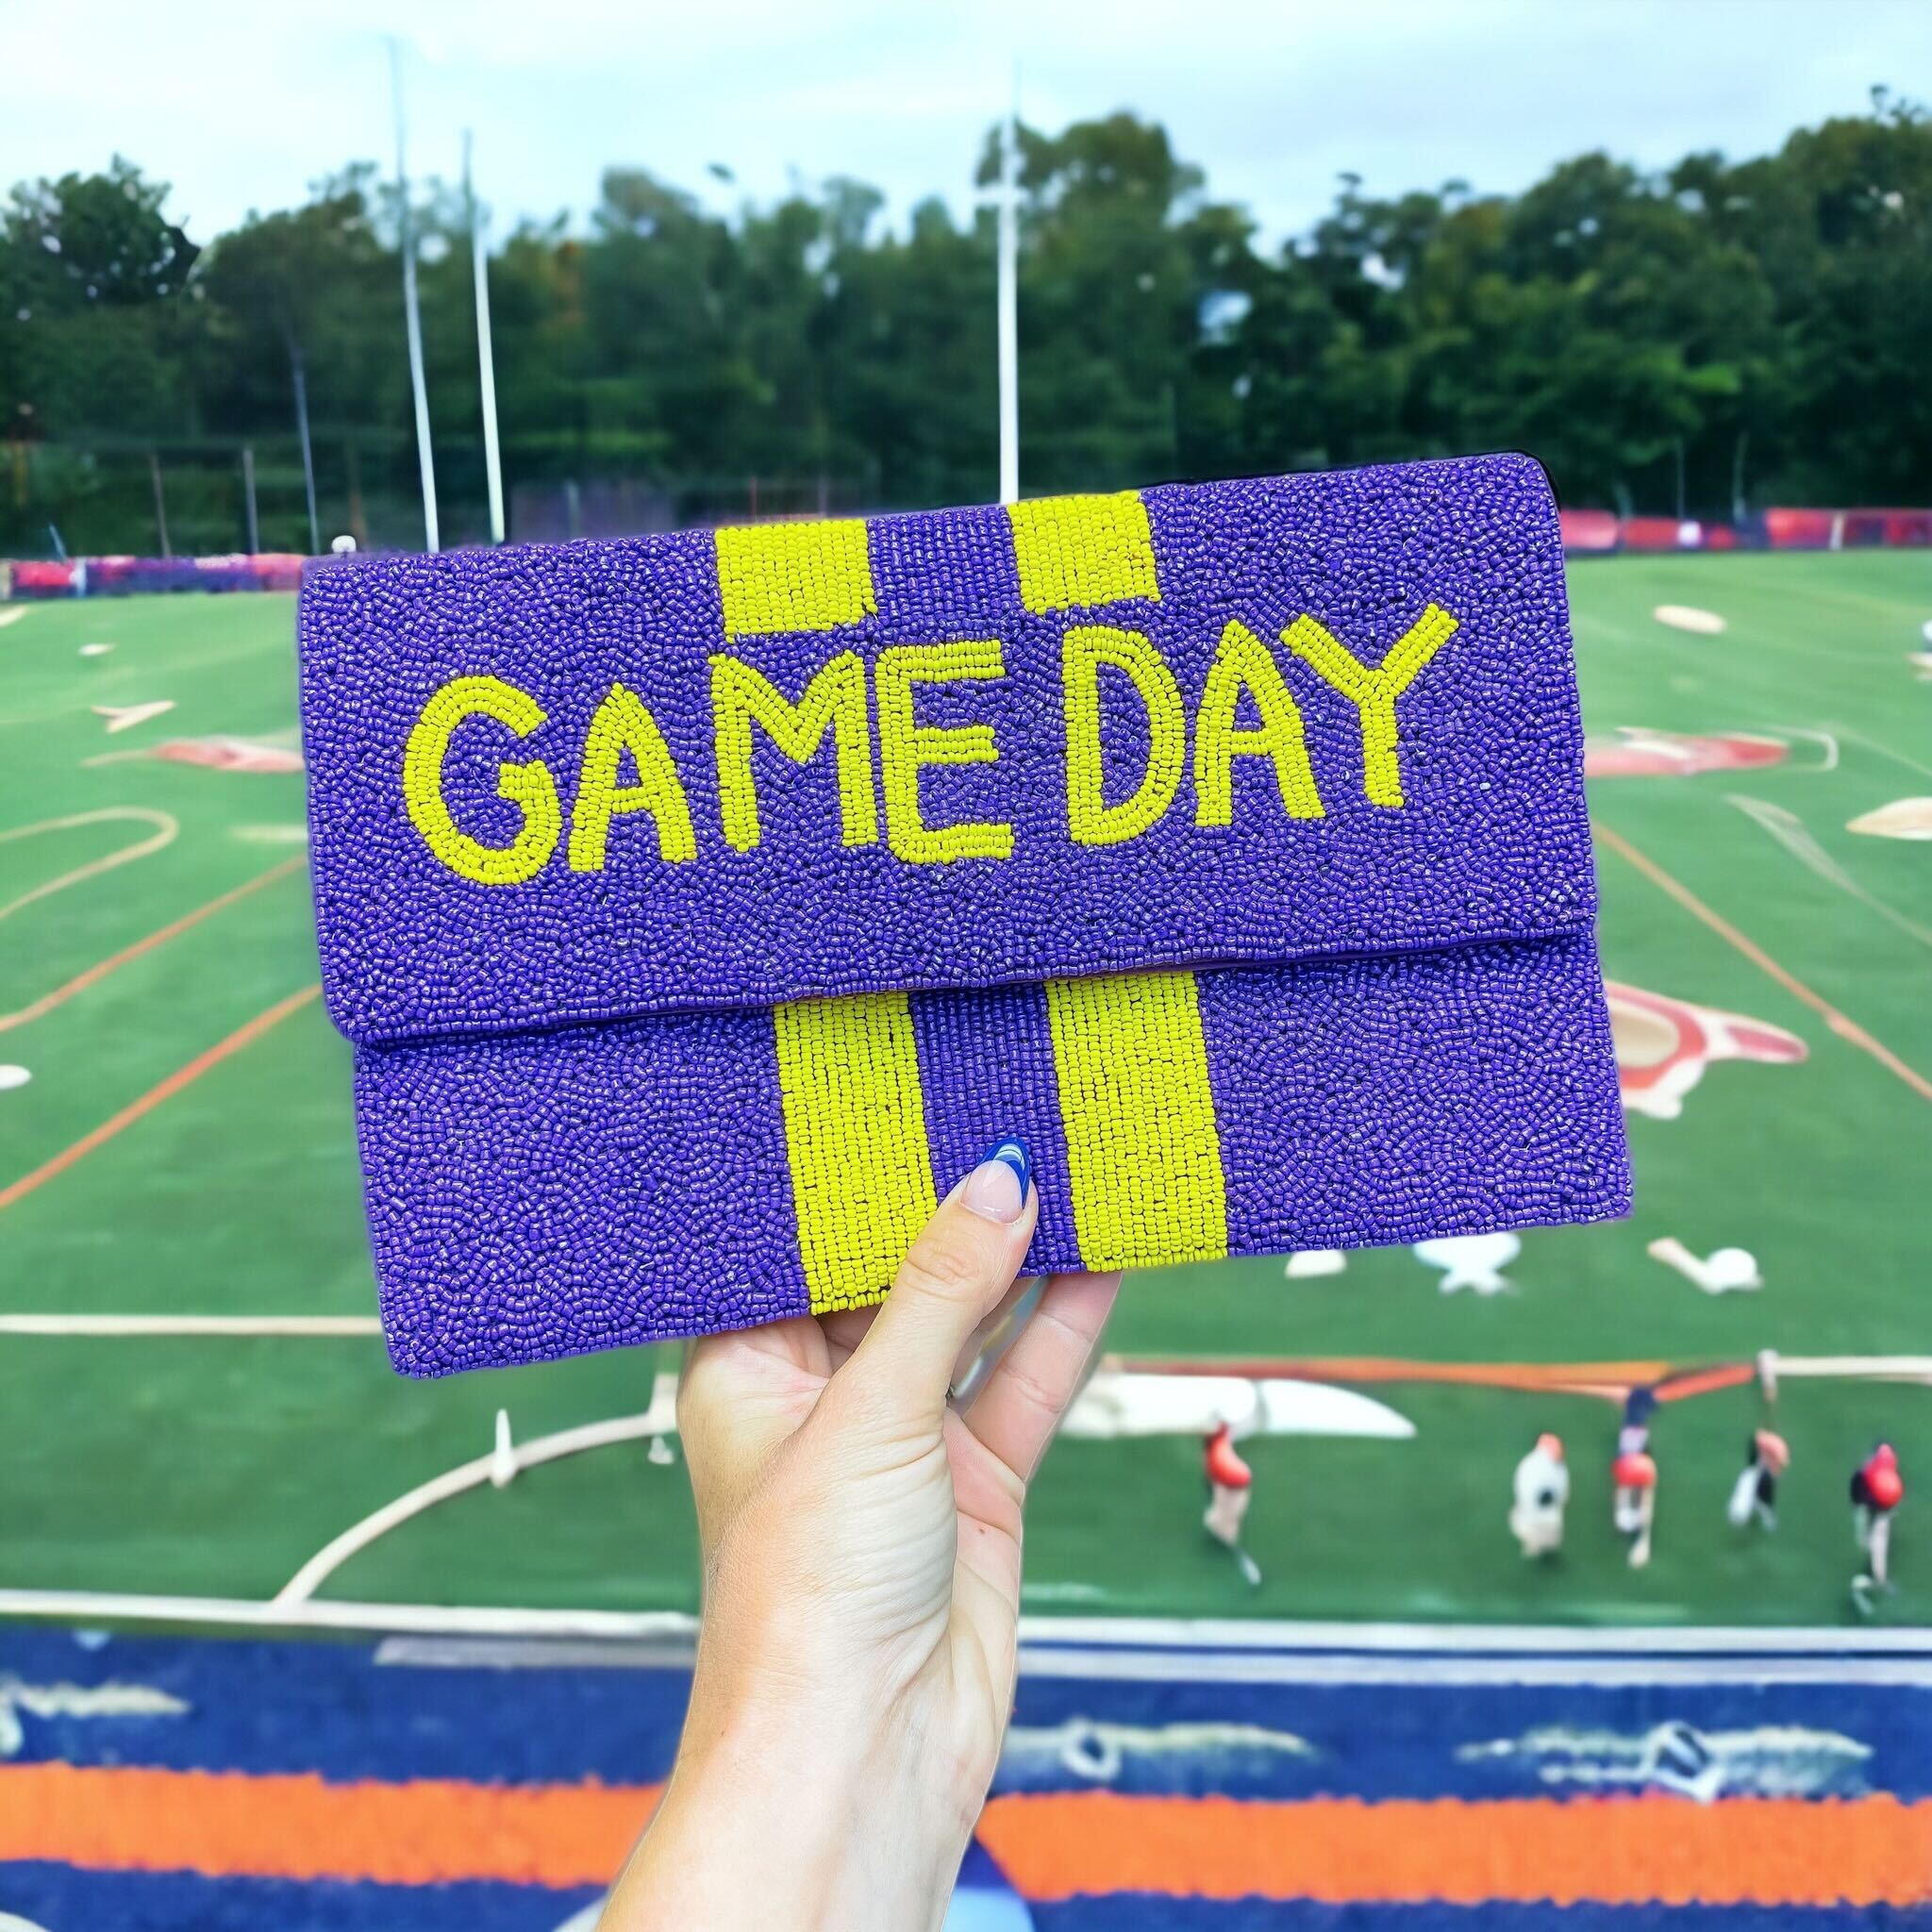 'Game Day' Beaded Clutch & Convertible Crossbody - Purple & Yellow